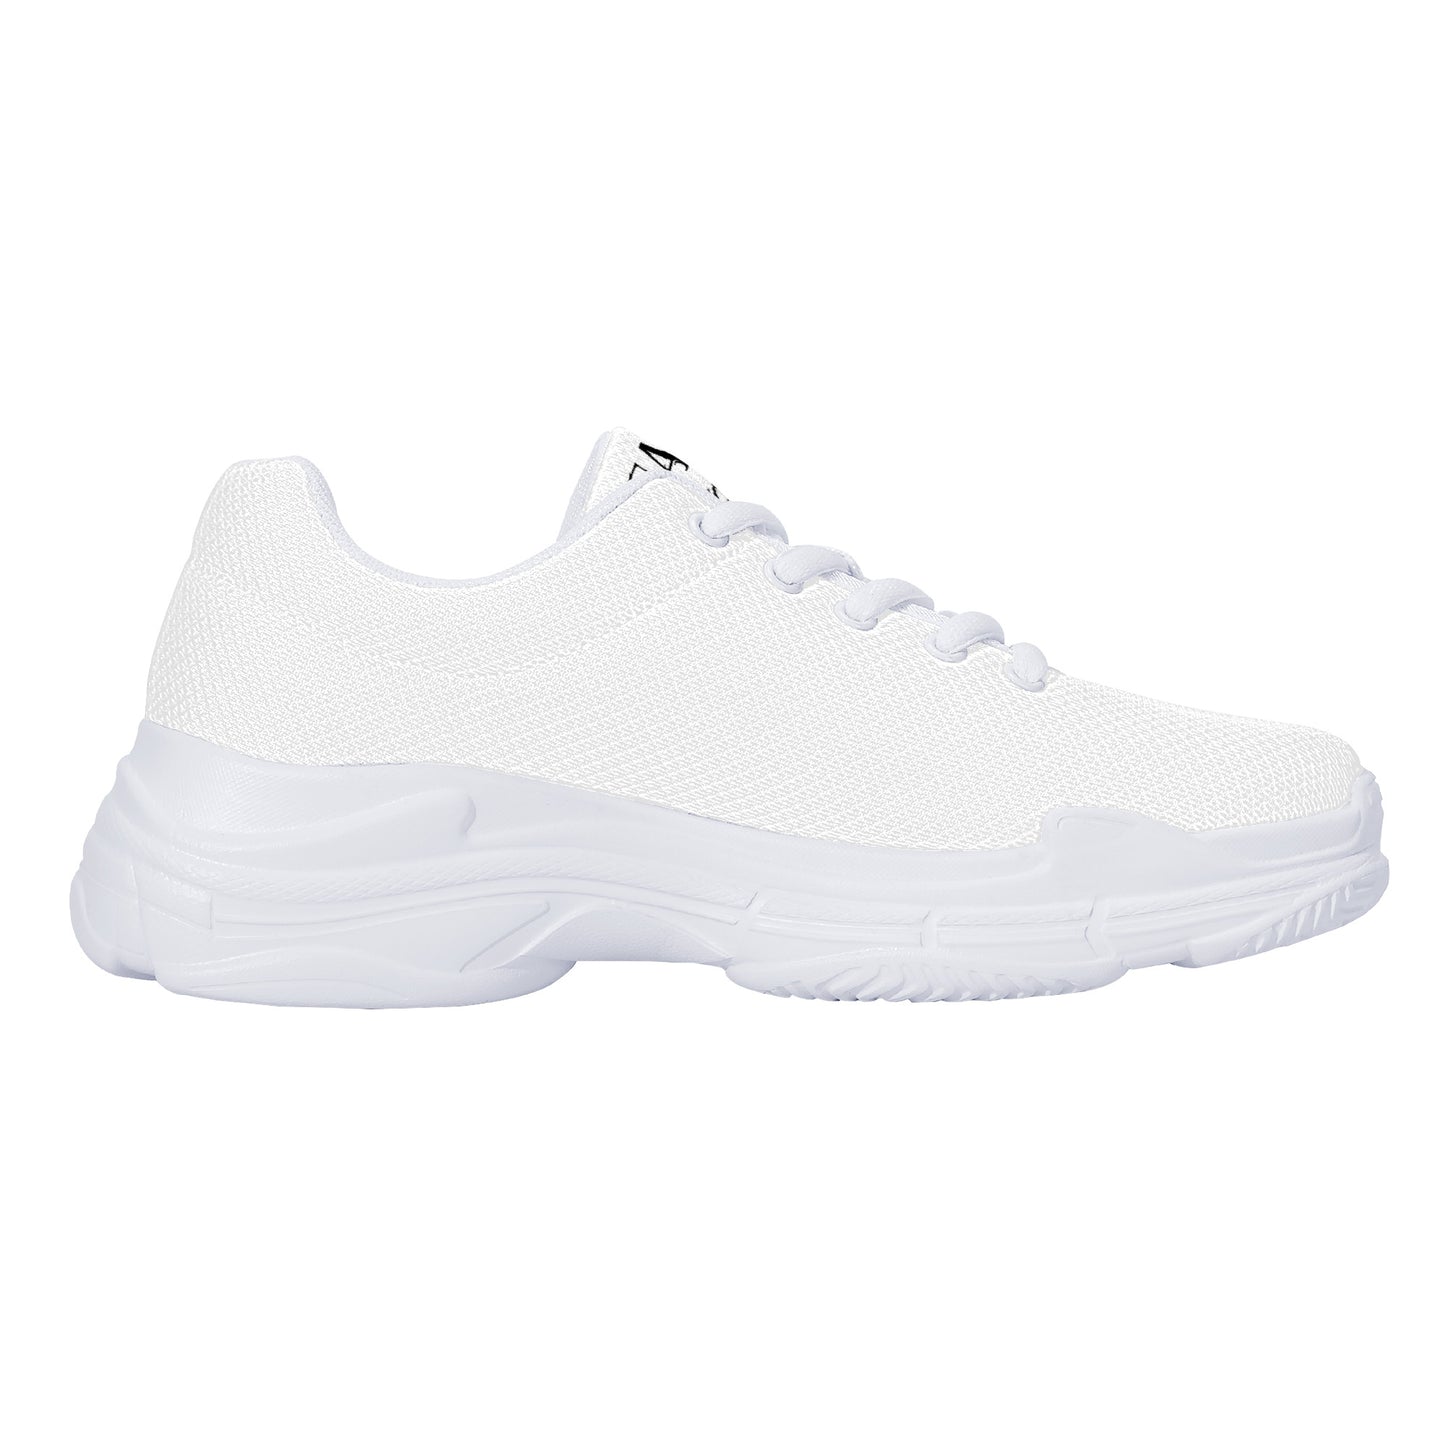 Cryptic Sneakers, White